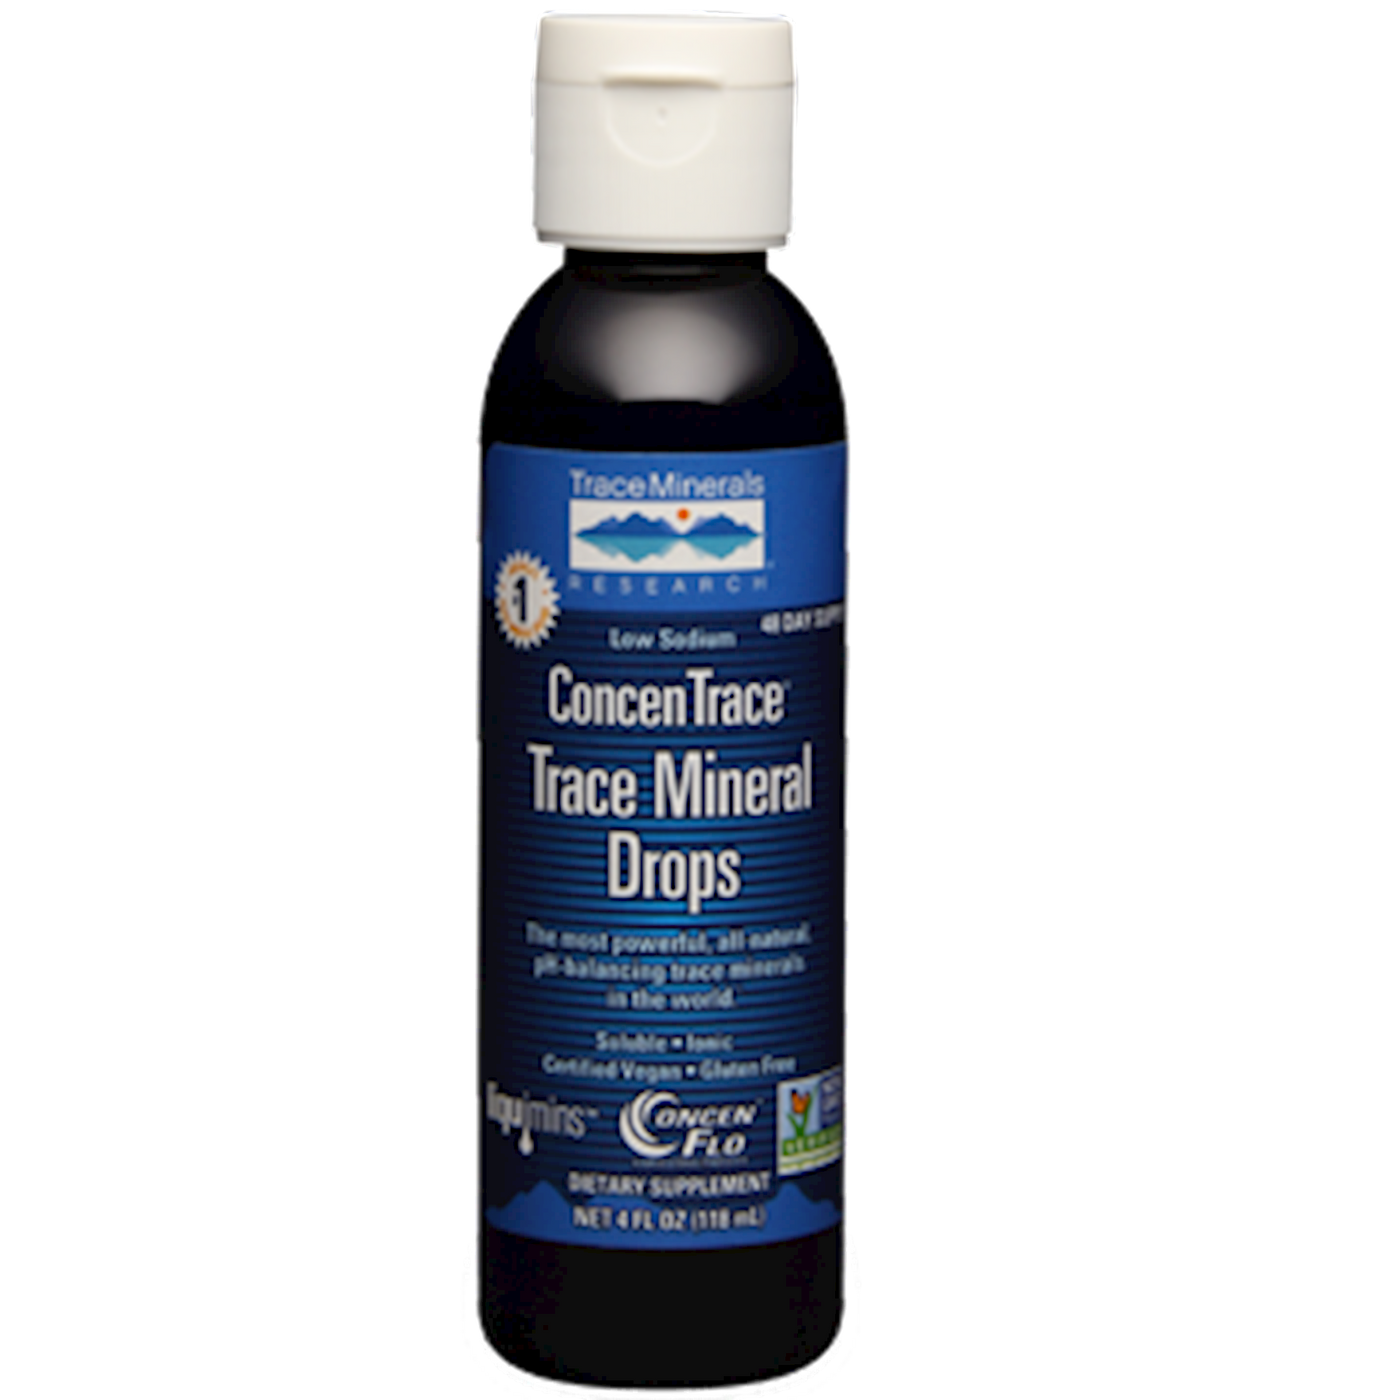 ConcenTrace Trace Mineral Drops  Curated Wellness